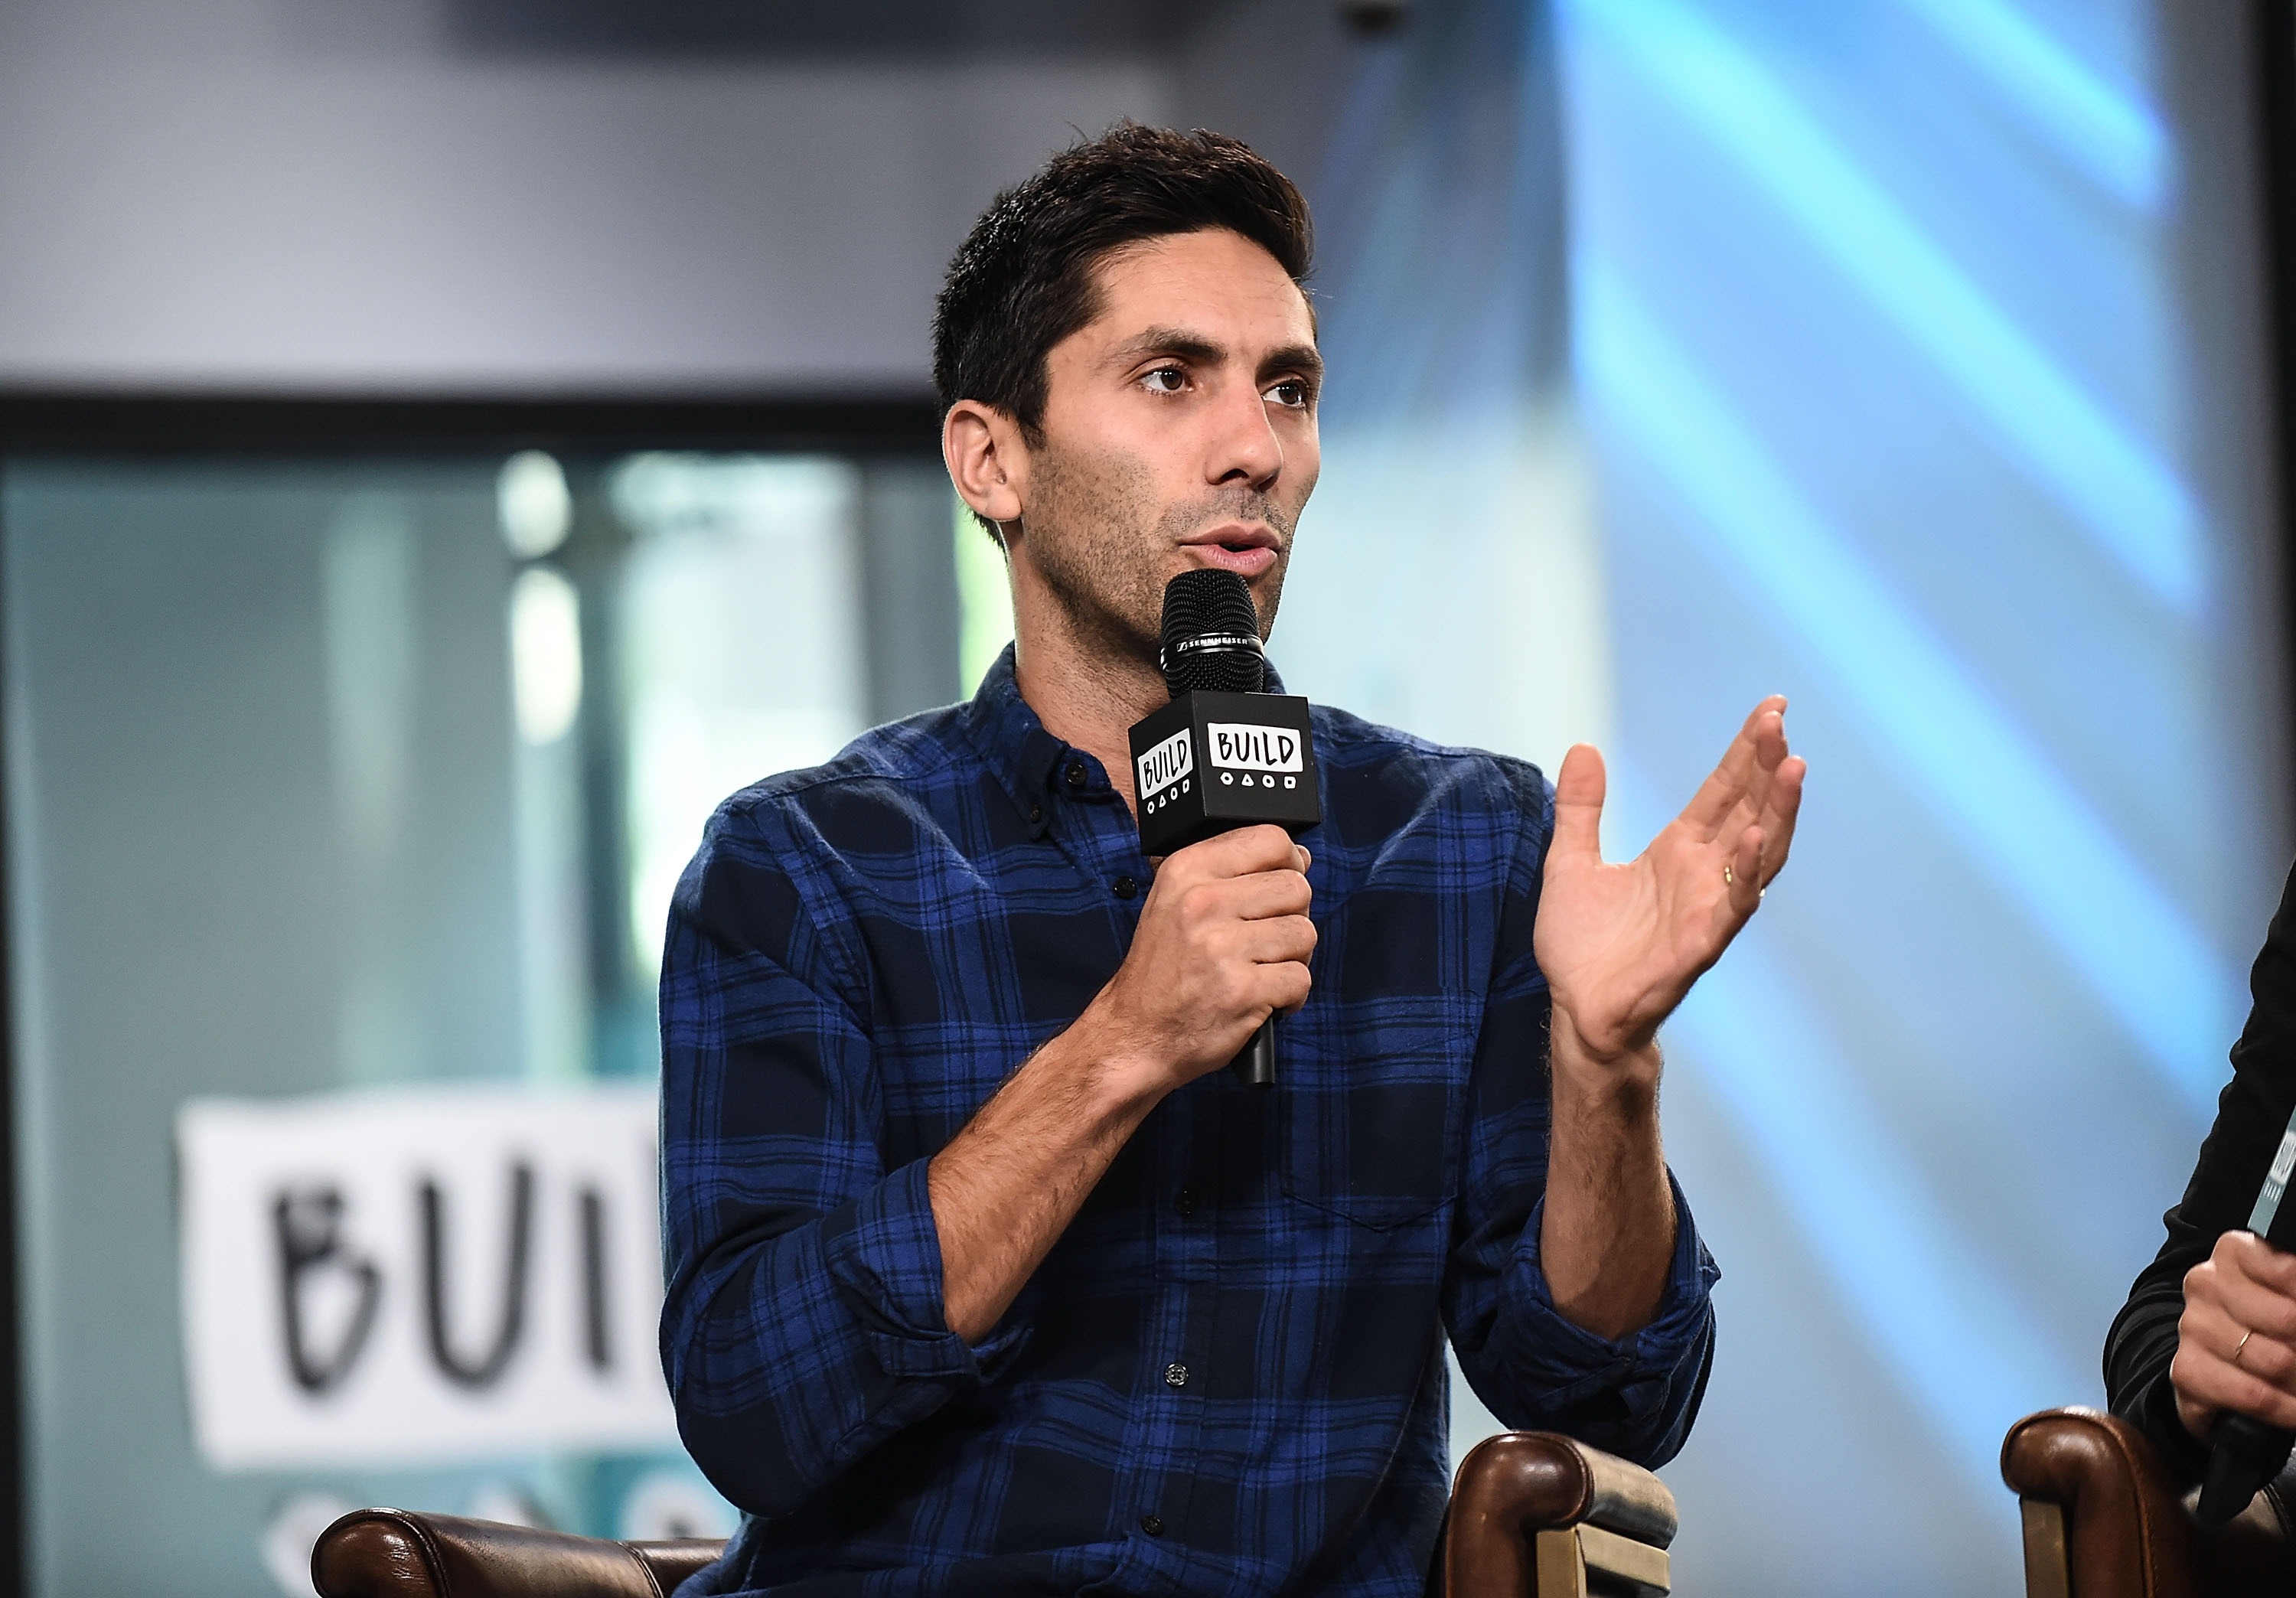 MTV’s ‘Catfish’ Suspended Amid Sexual Misconduct Allegations Against Its Host